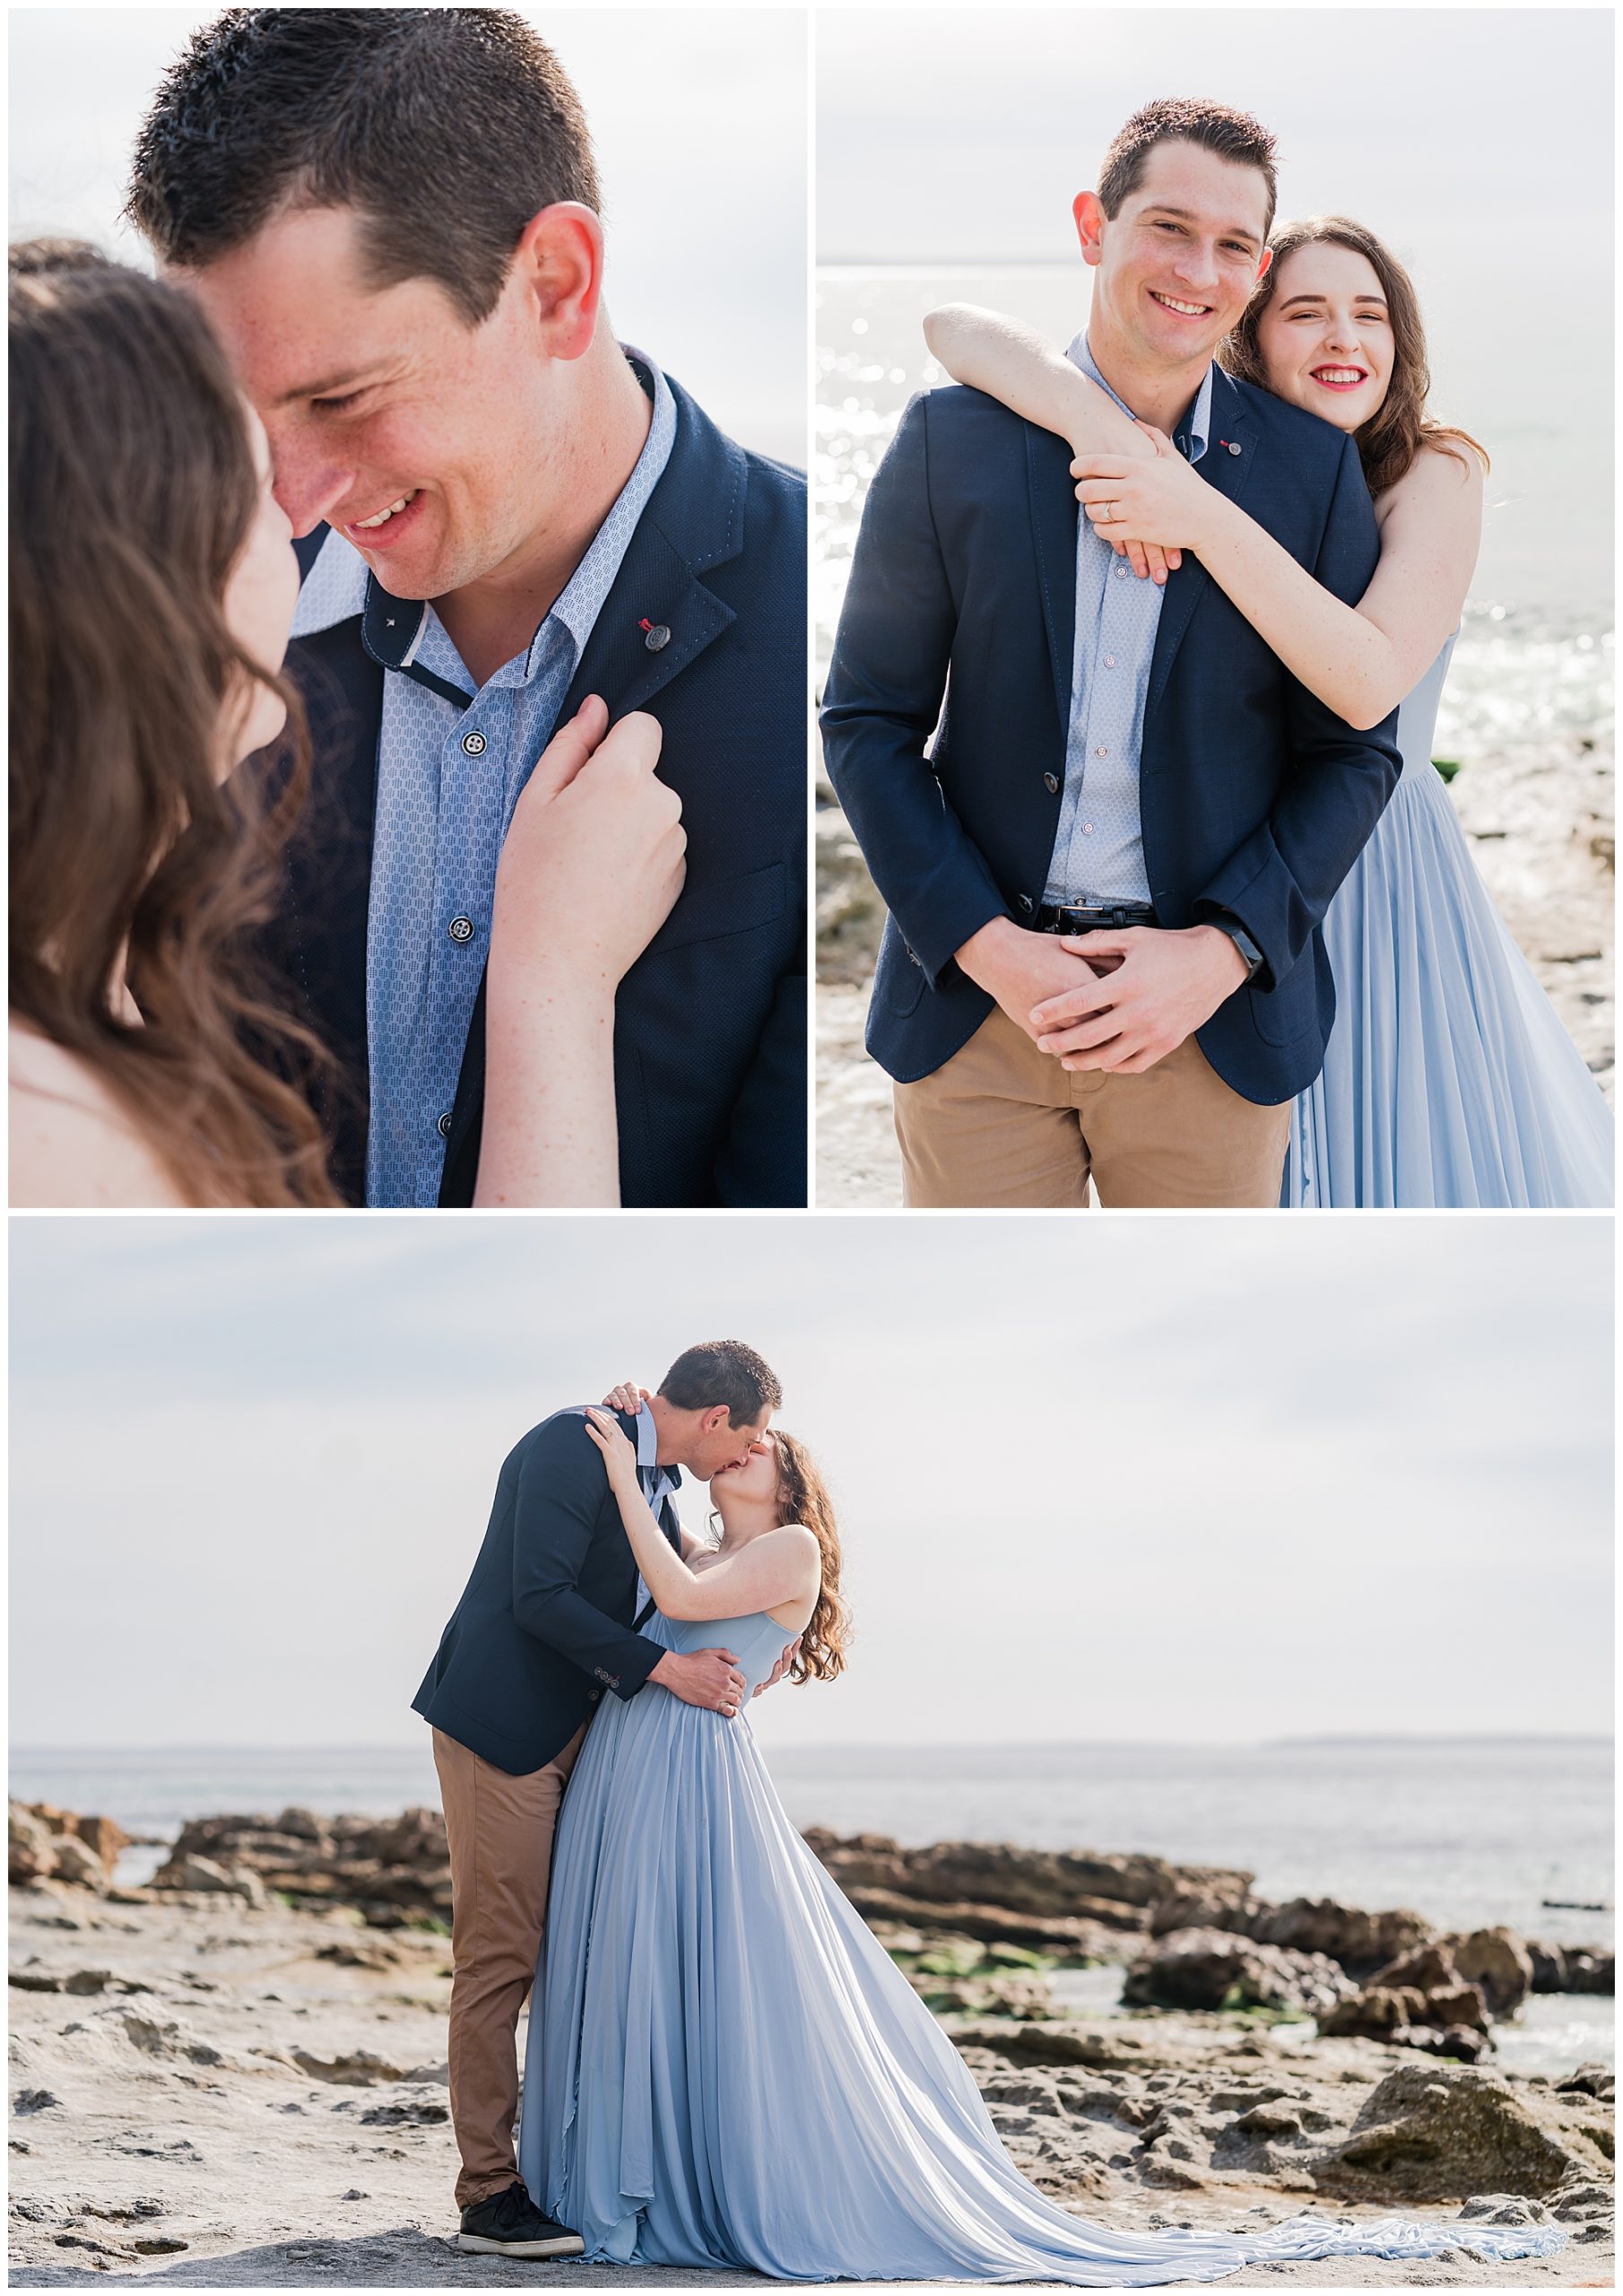 Elegant engagement sessions on a beach in Australia